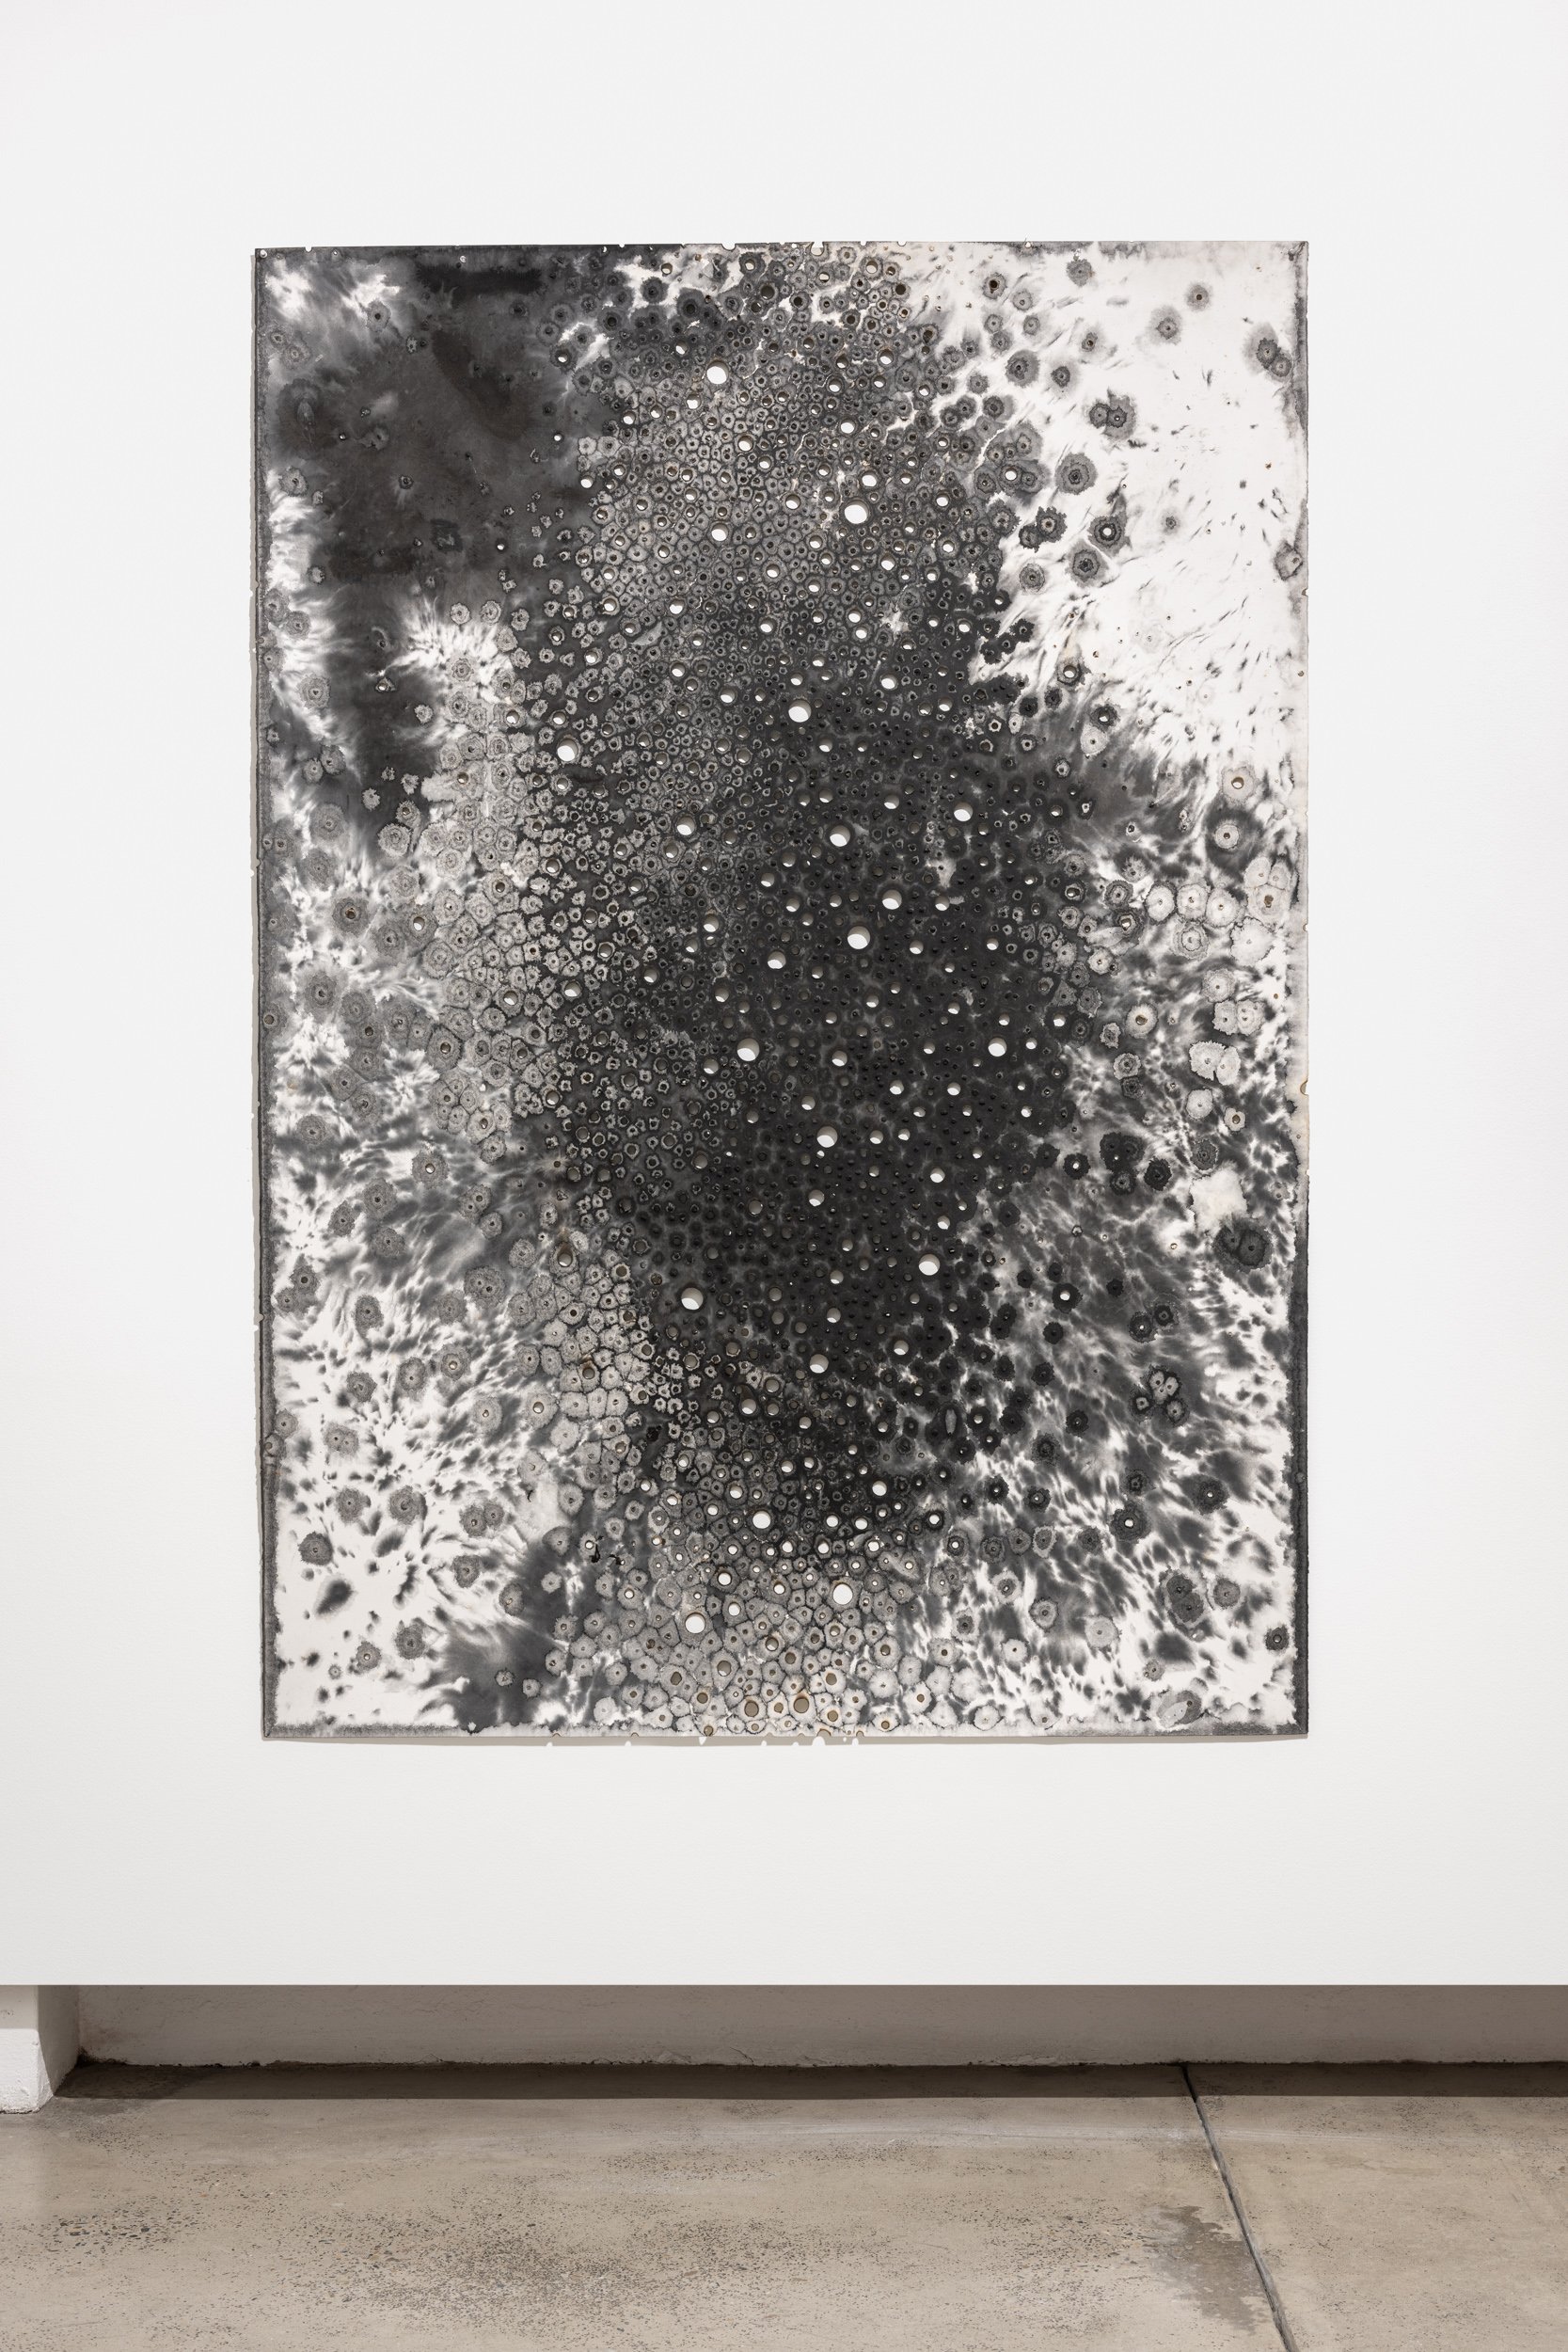 ll2021-05_elixir_ 2020-21_chinese ink, fire and rain on paper_200 x 140 cm_photo by mark pokorny.jpg